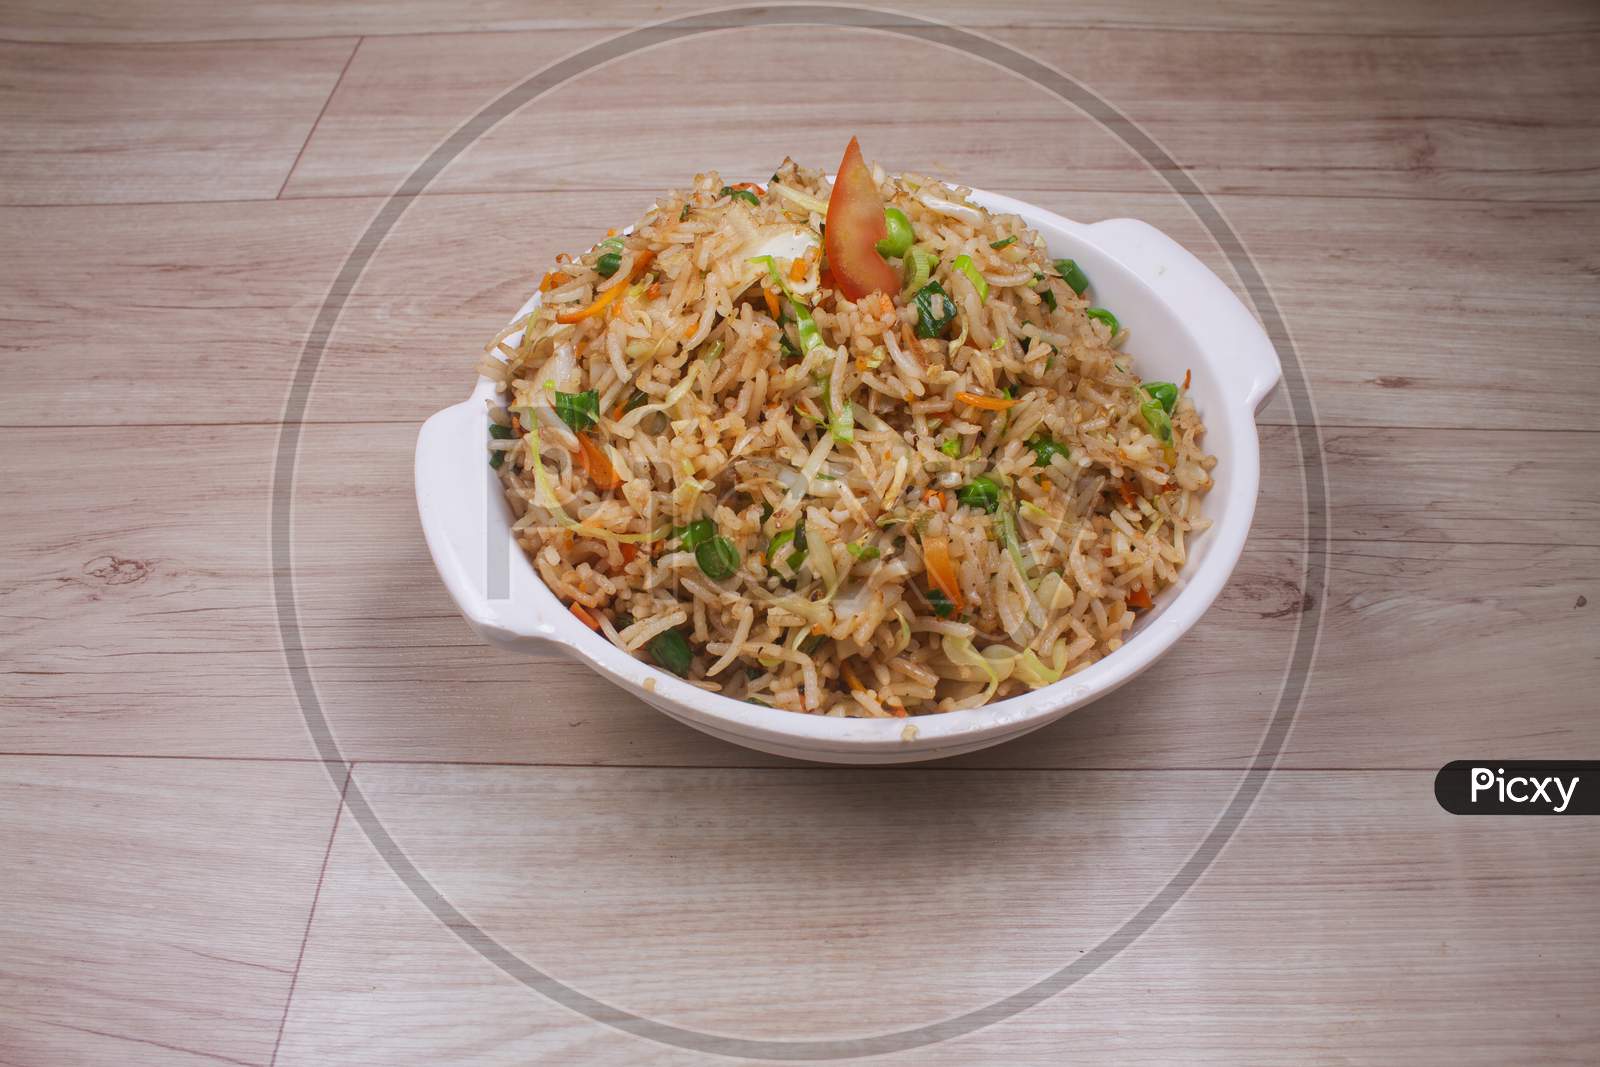 Healthy And Tasty Veg Fried Rice Made From Mixed Veggies, Served In Bowl On Rustic Wooden Background, Indian Cuisine, Selective Focus